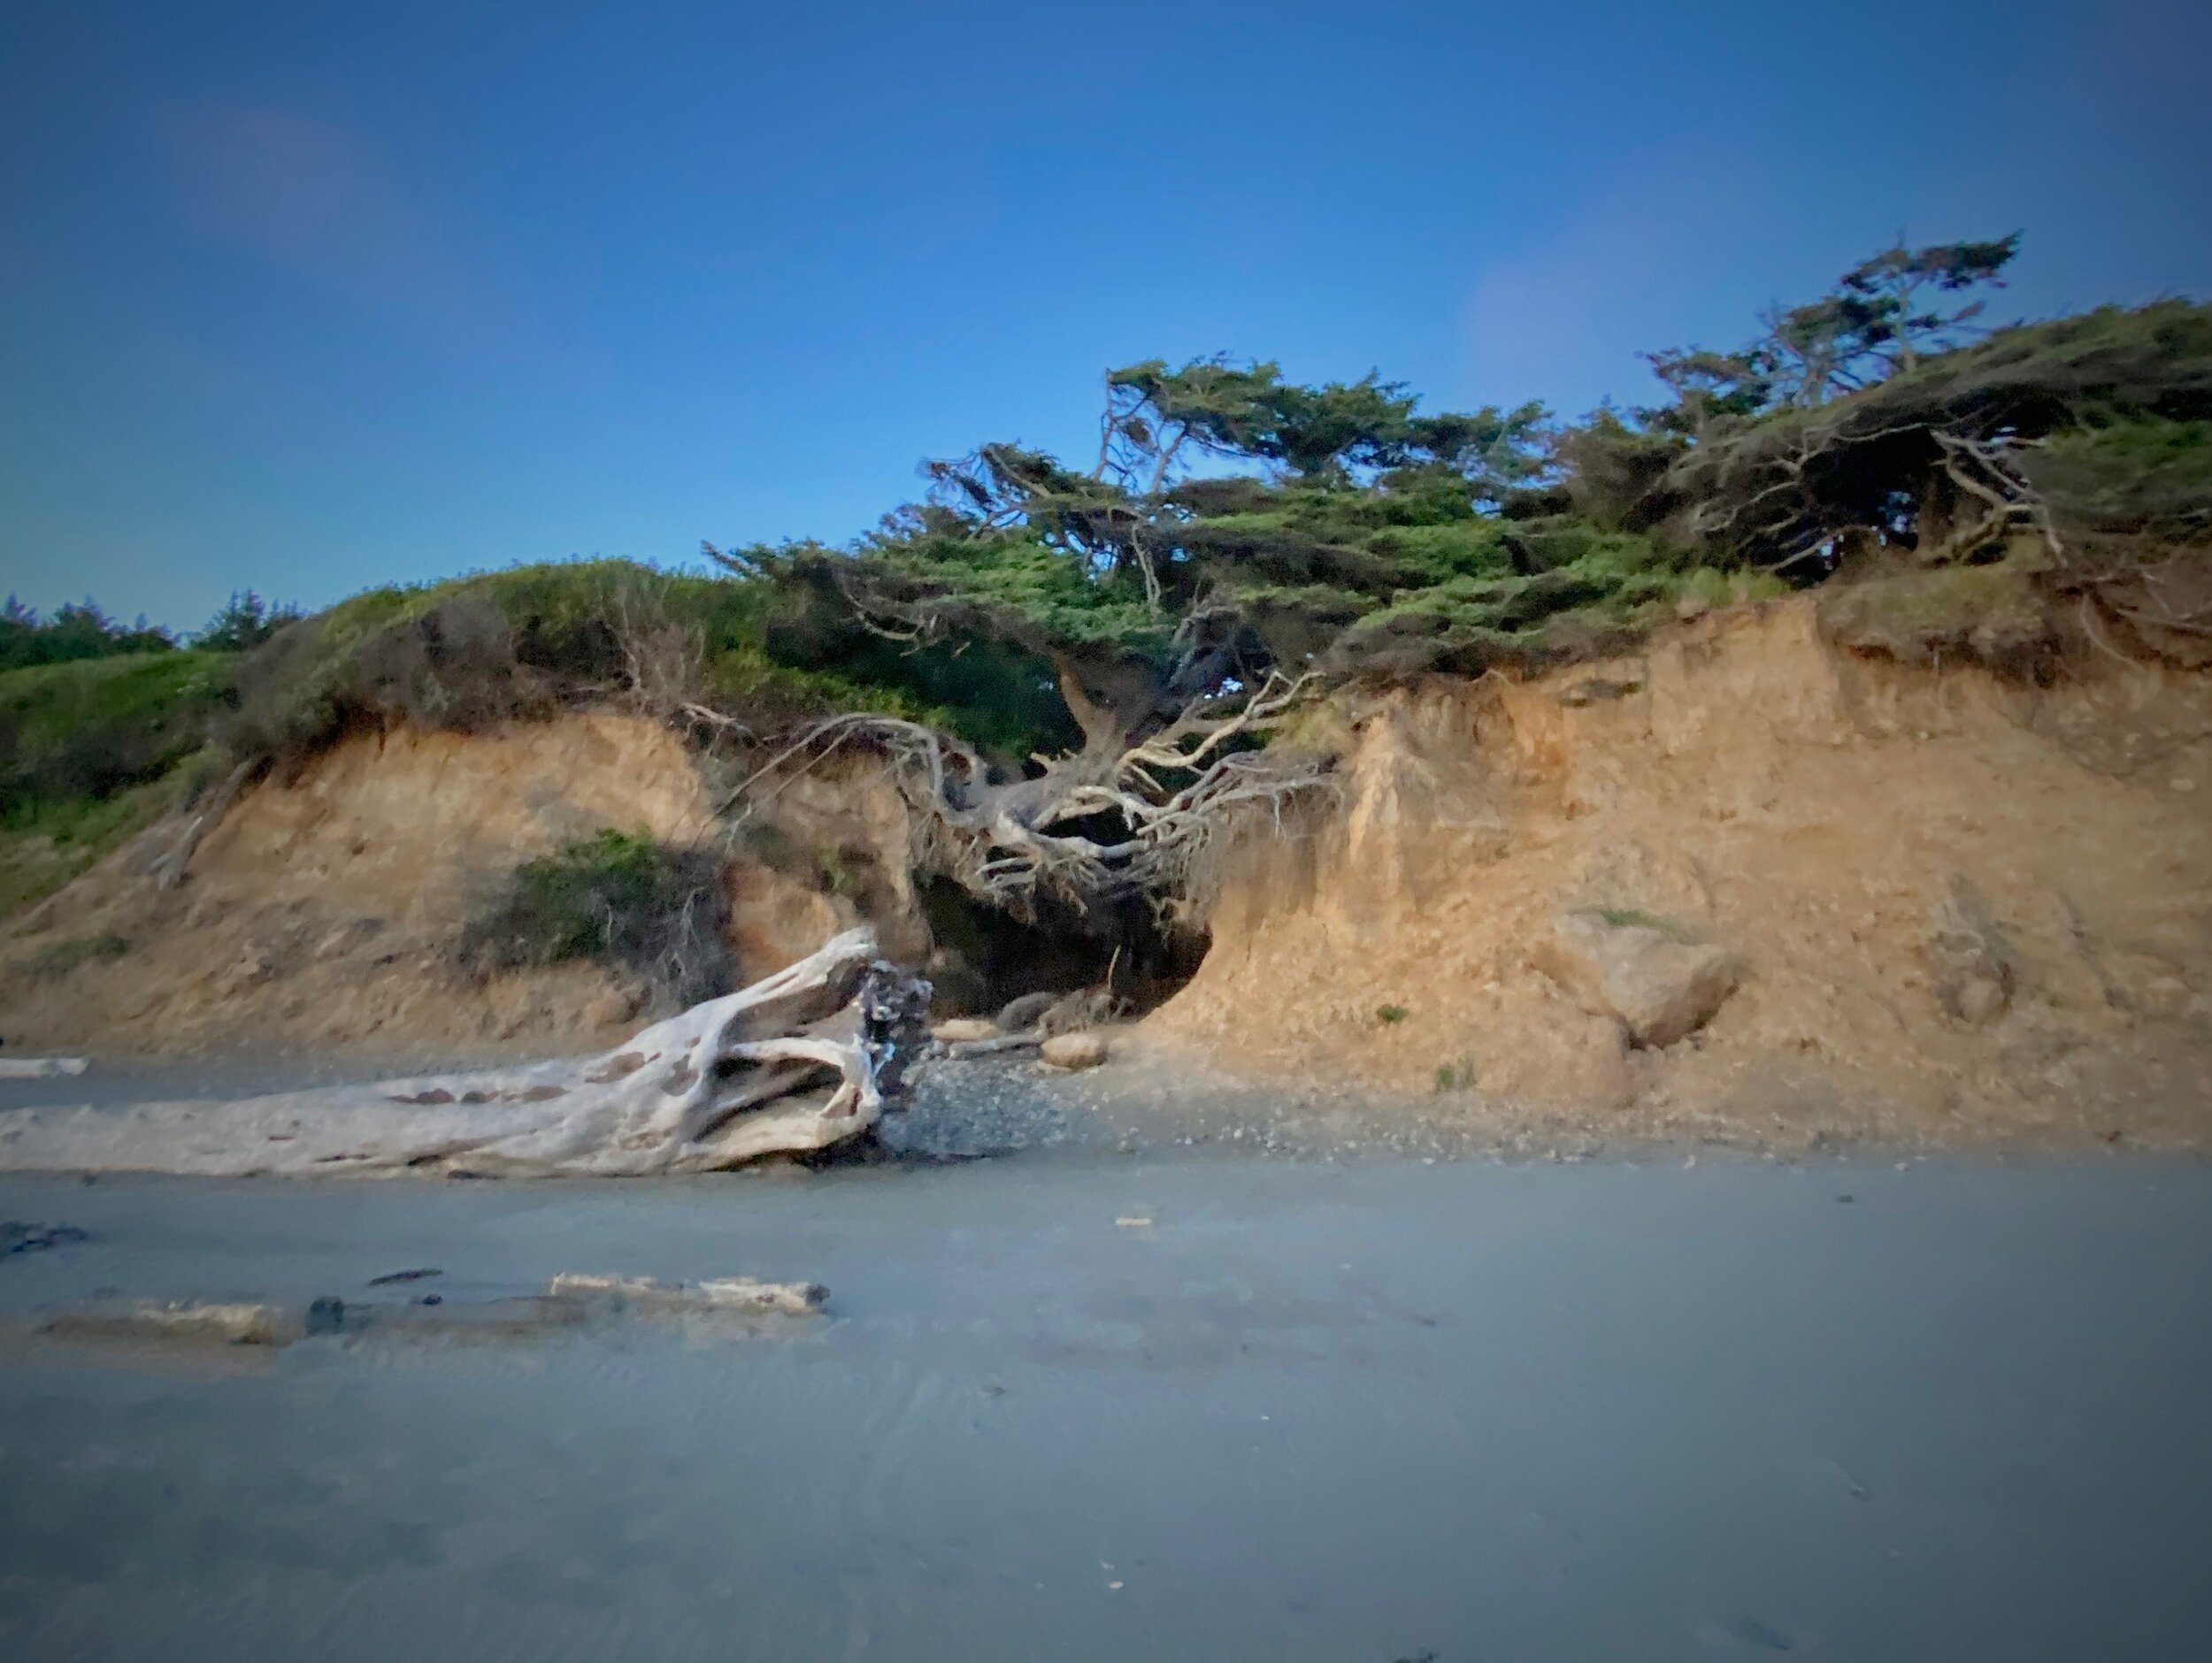 The “Tree of Life” root cave on Kalaloch Beach.  Photo by Karen Boudreaux, June 17, 2021